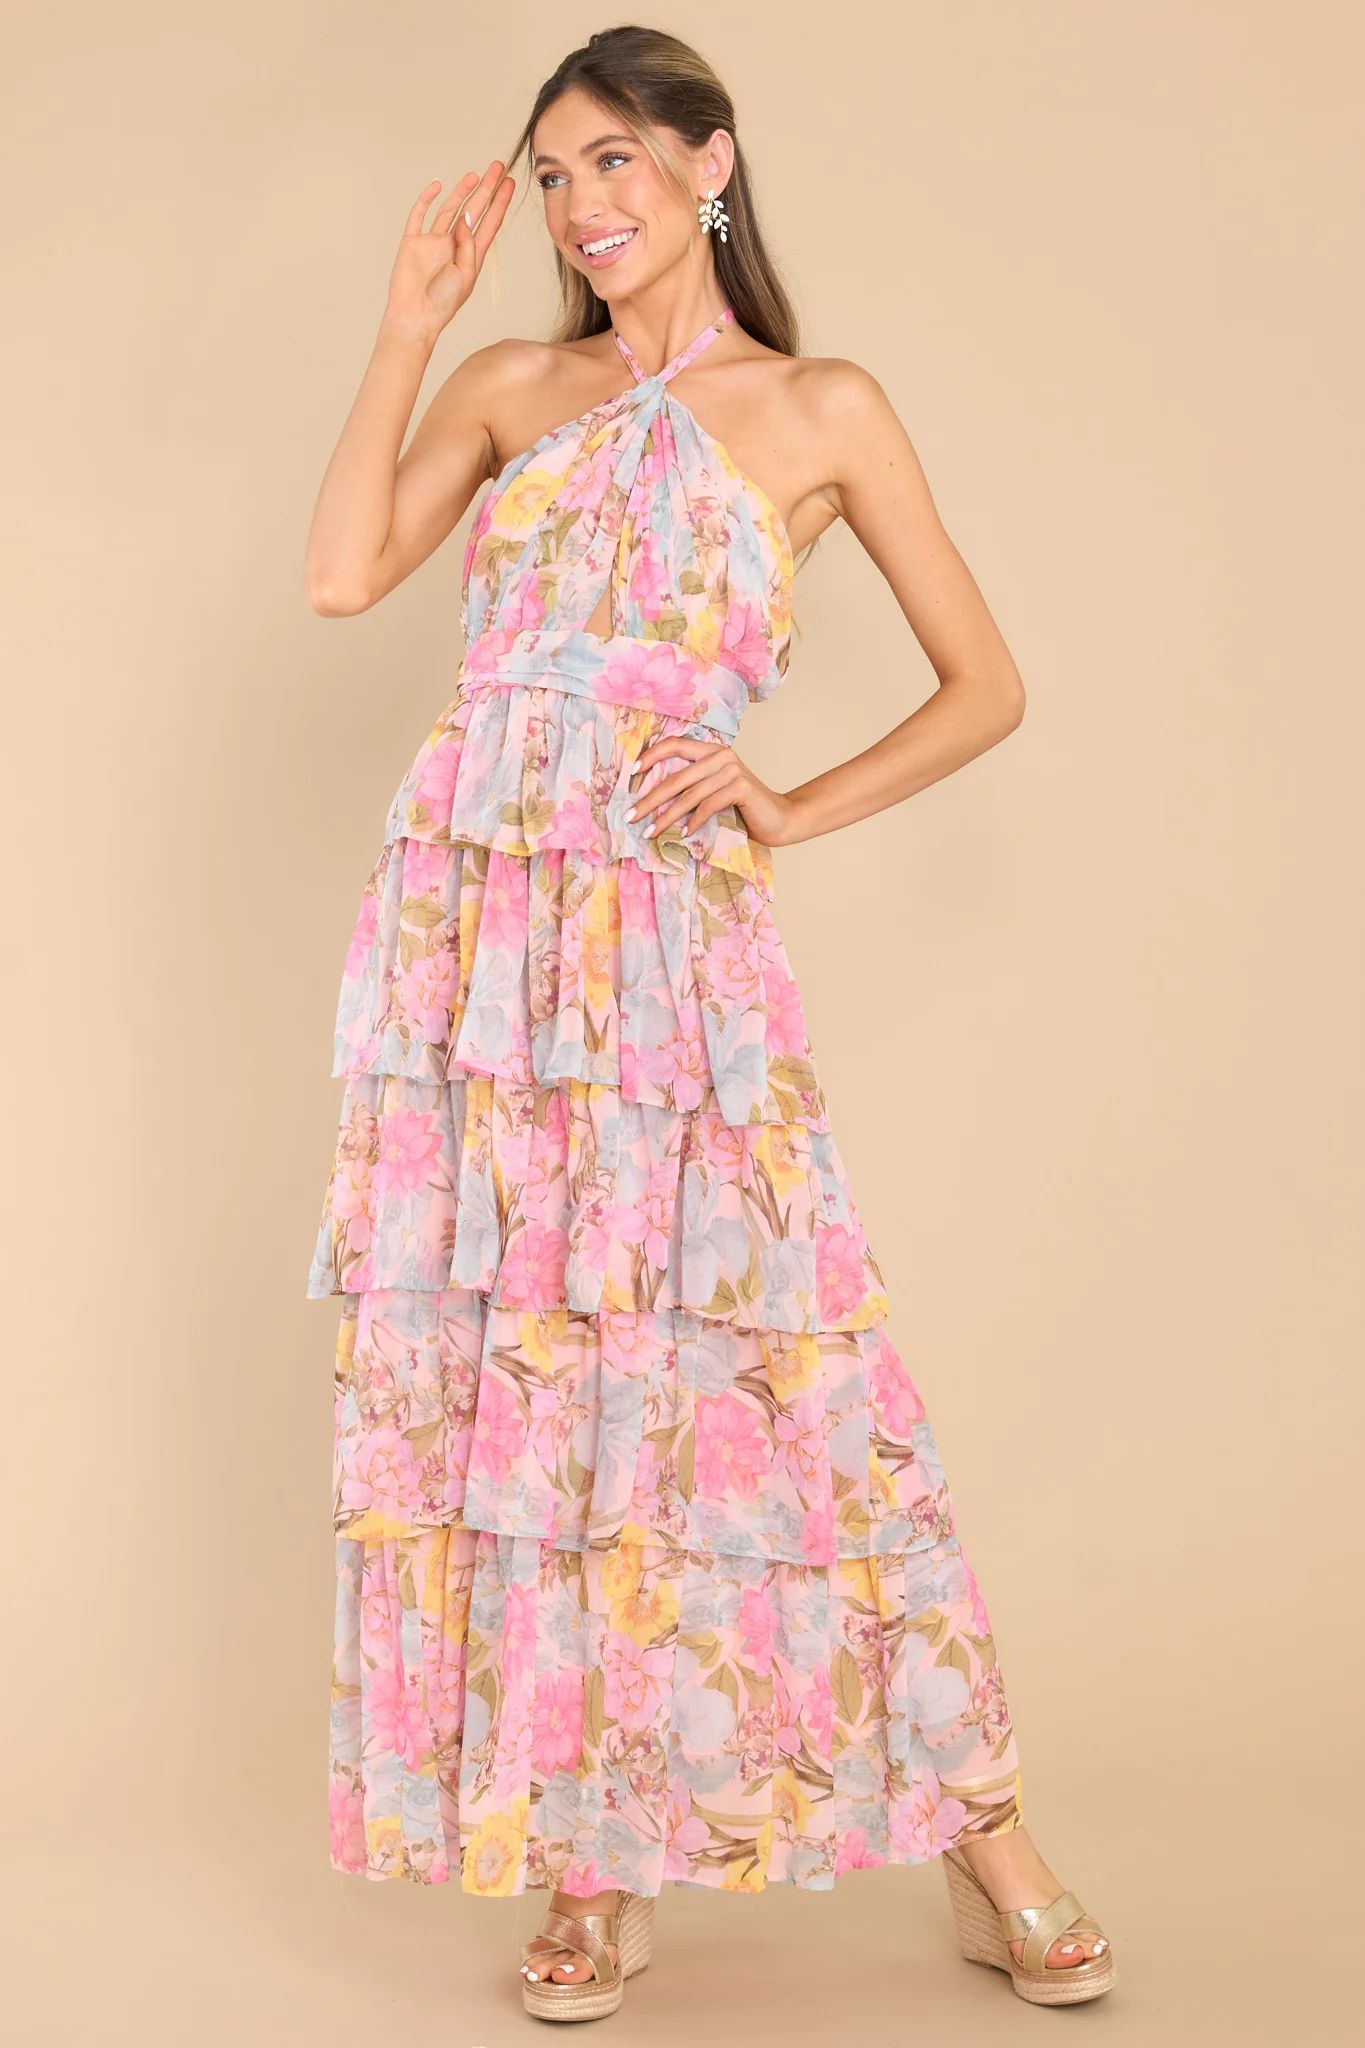 Lost In My Eyes Pink Floral Maxi Dress | Red Dress 